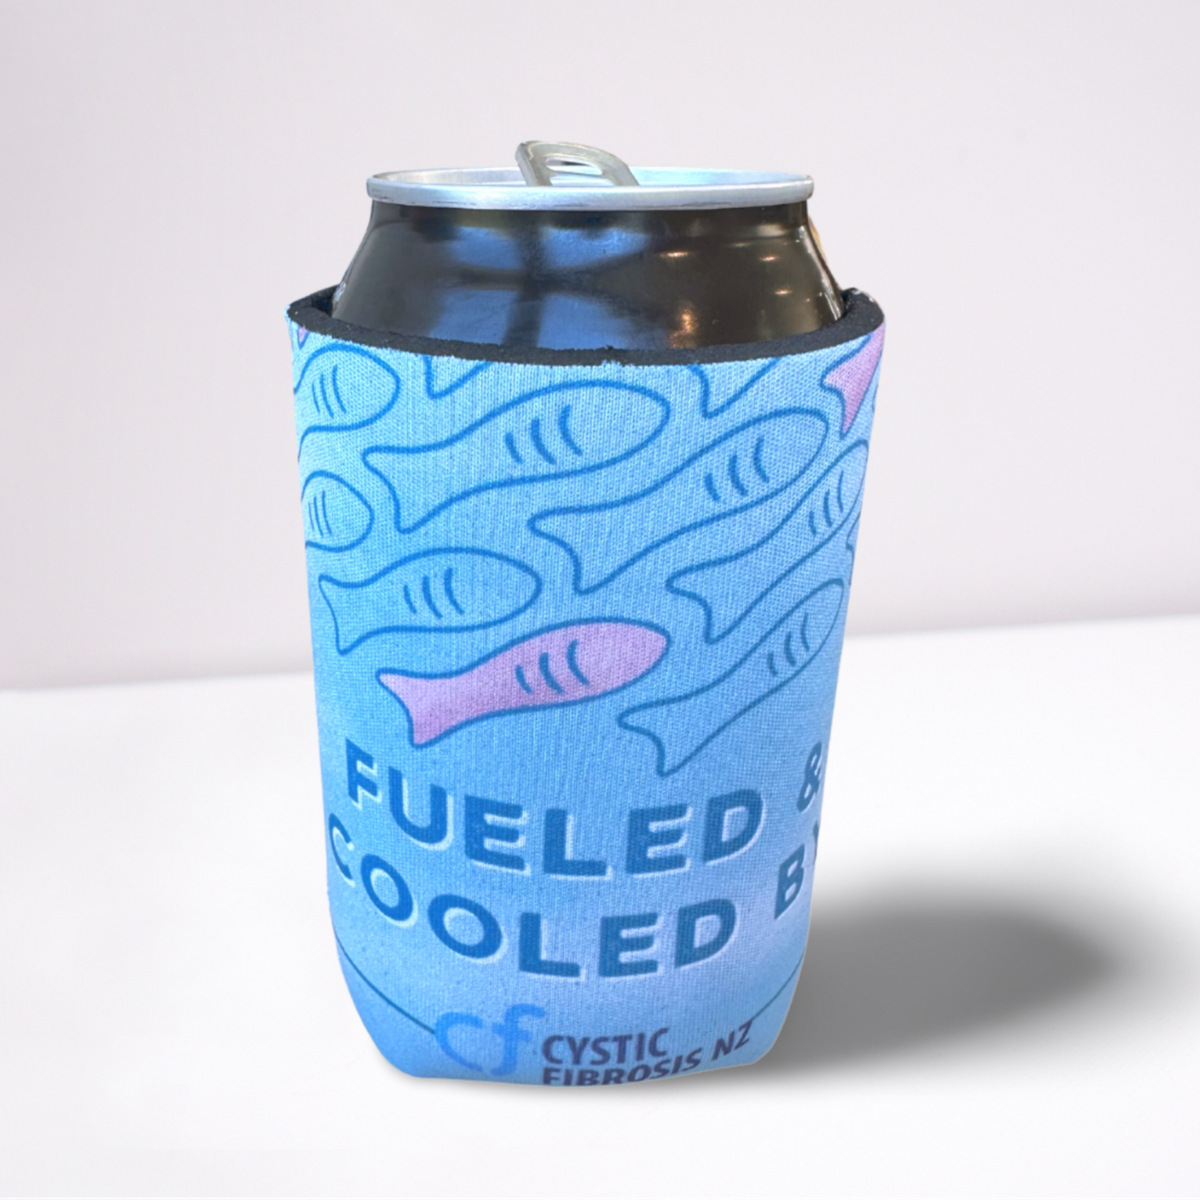 Chocky Fish Stubby Holder - Fueled and Cooled!